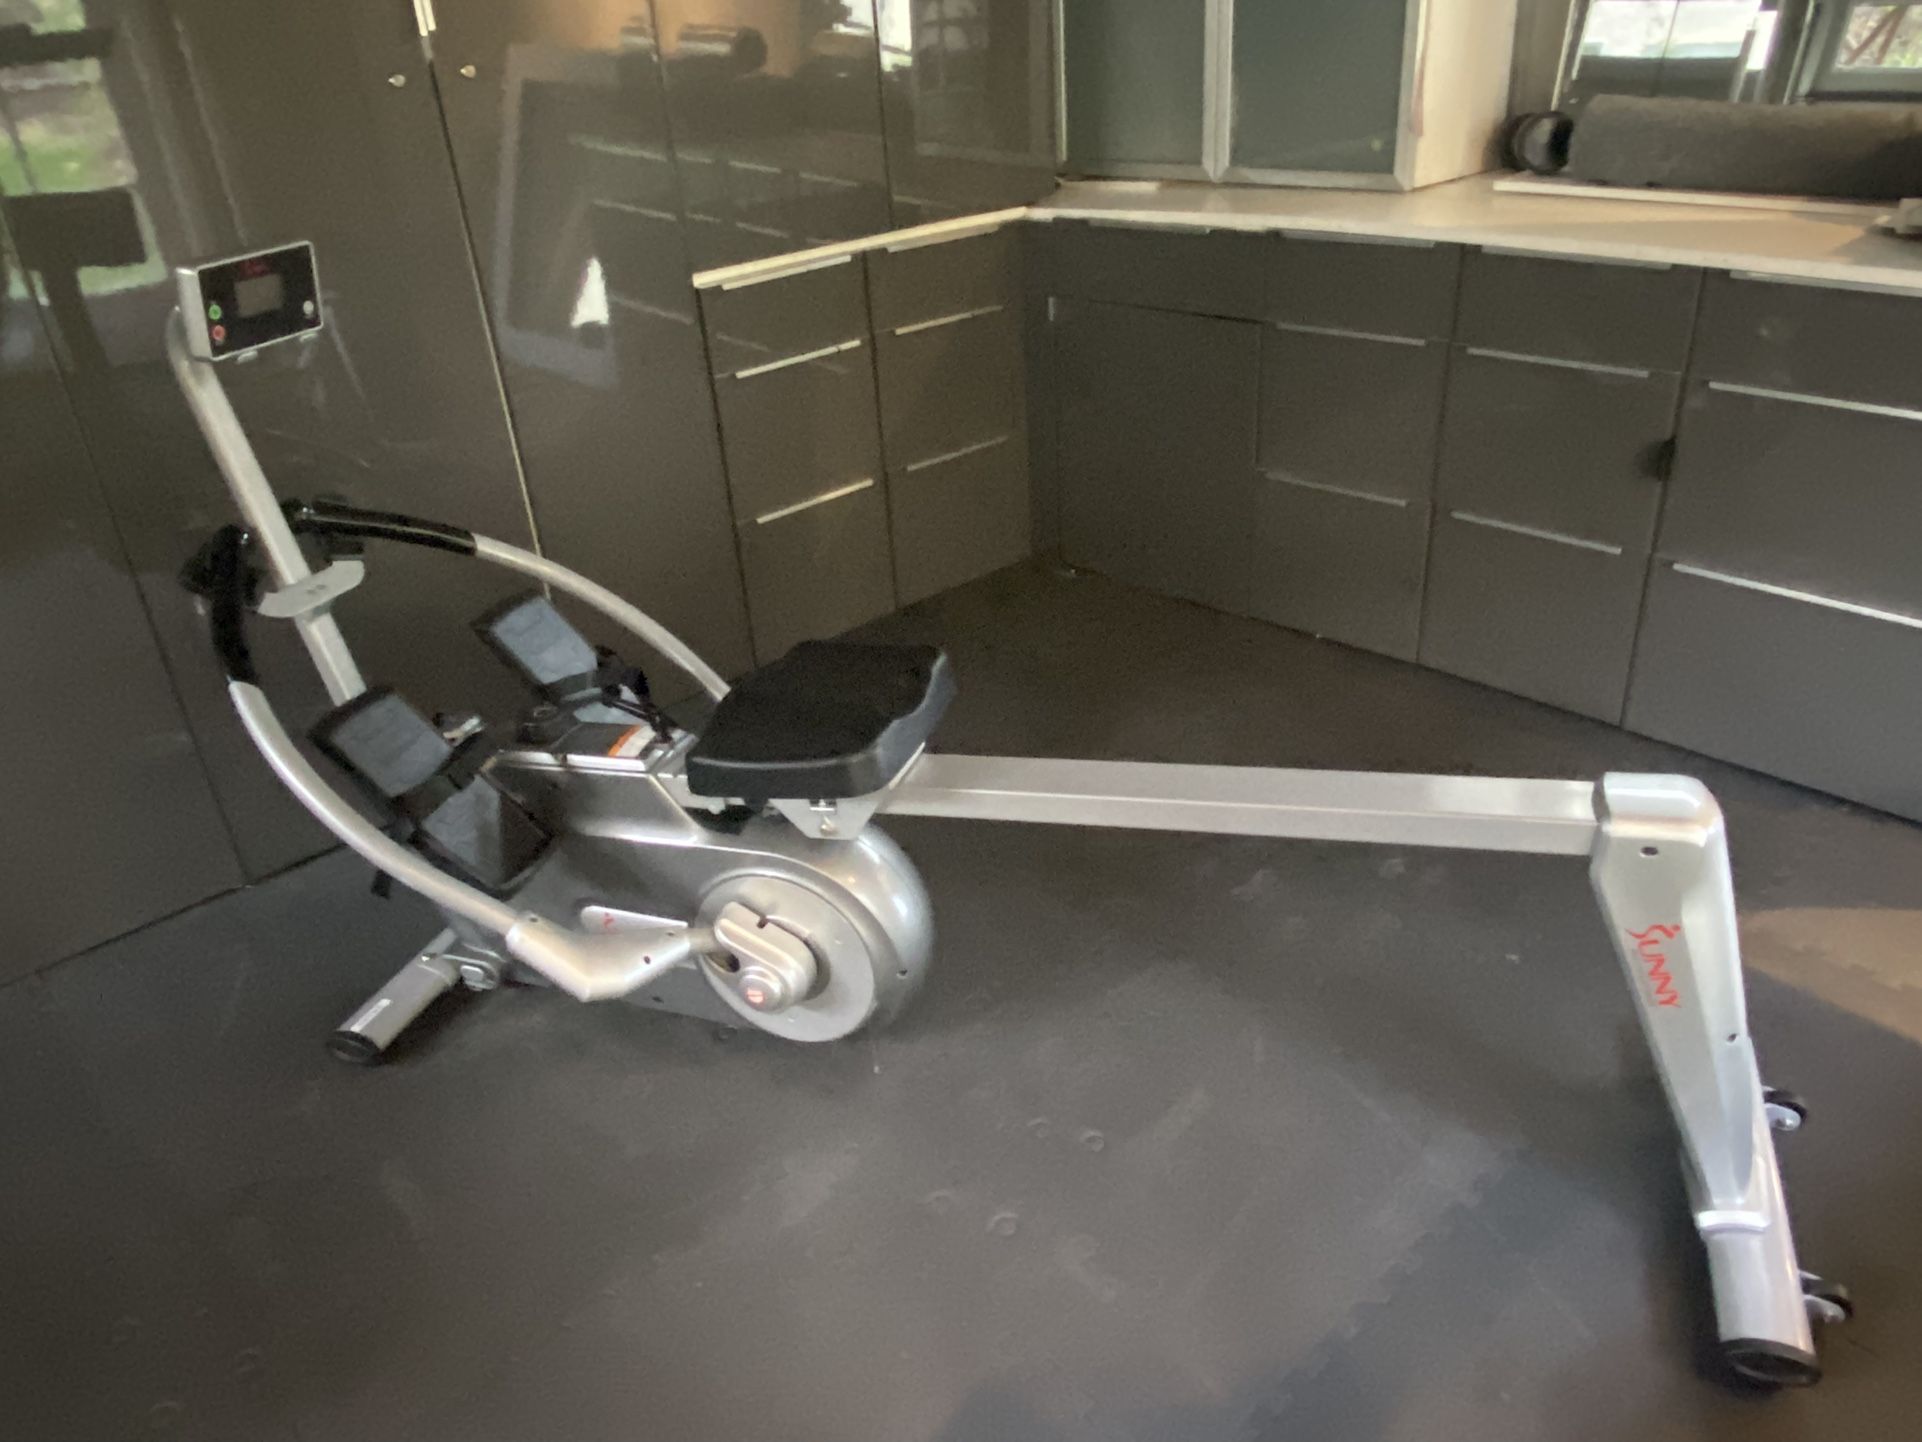 New Rowing Machine - Sunny Health And Fitness